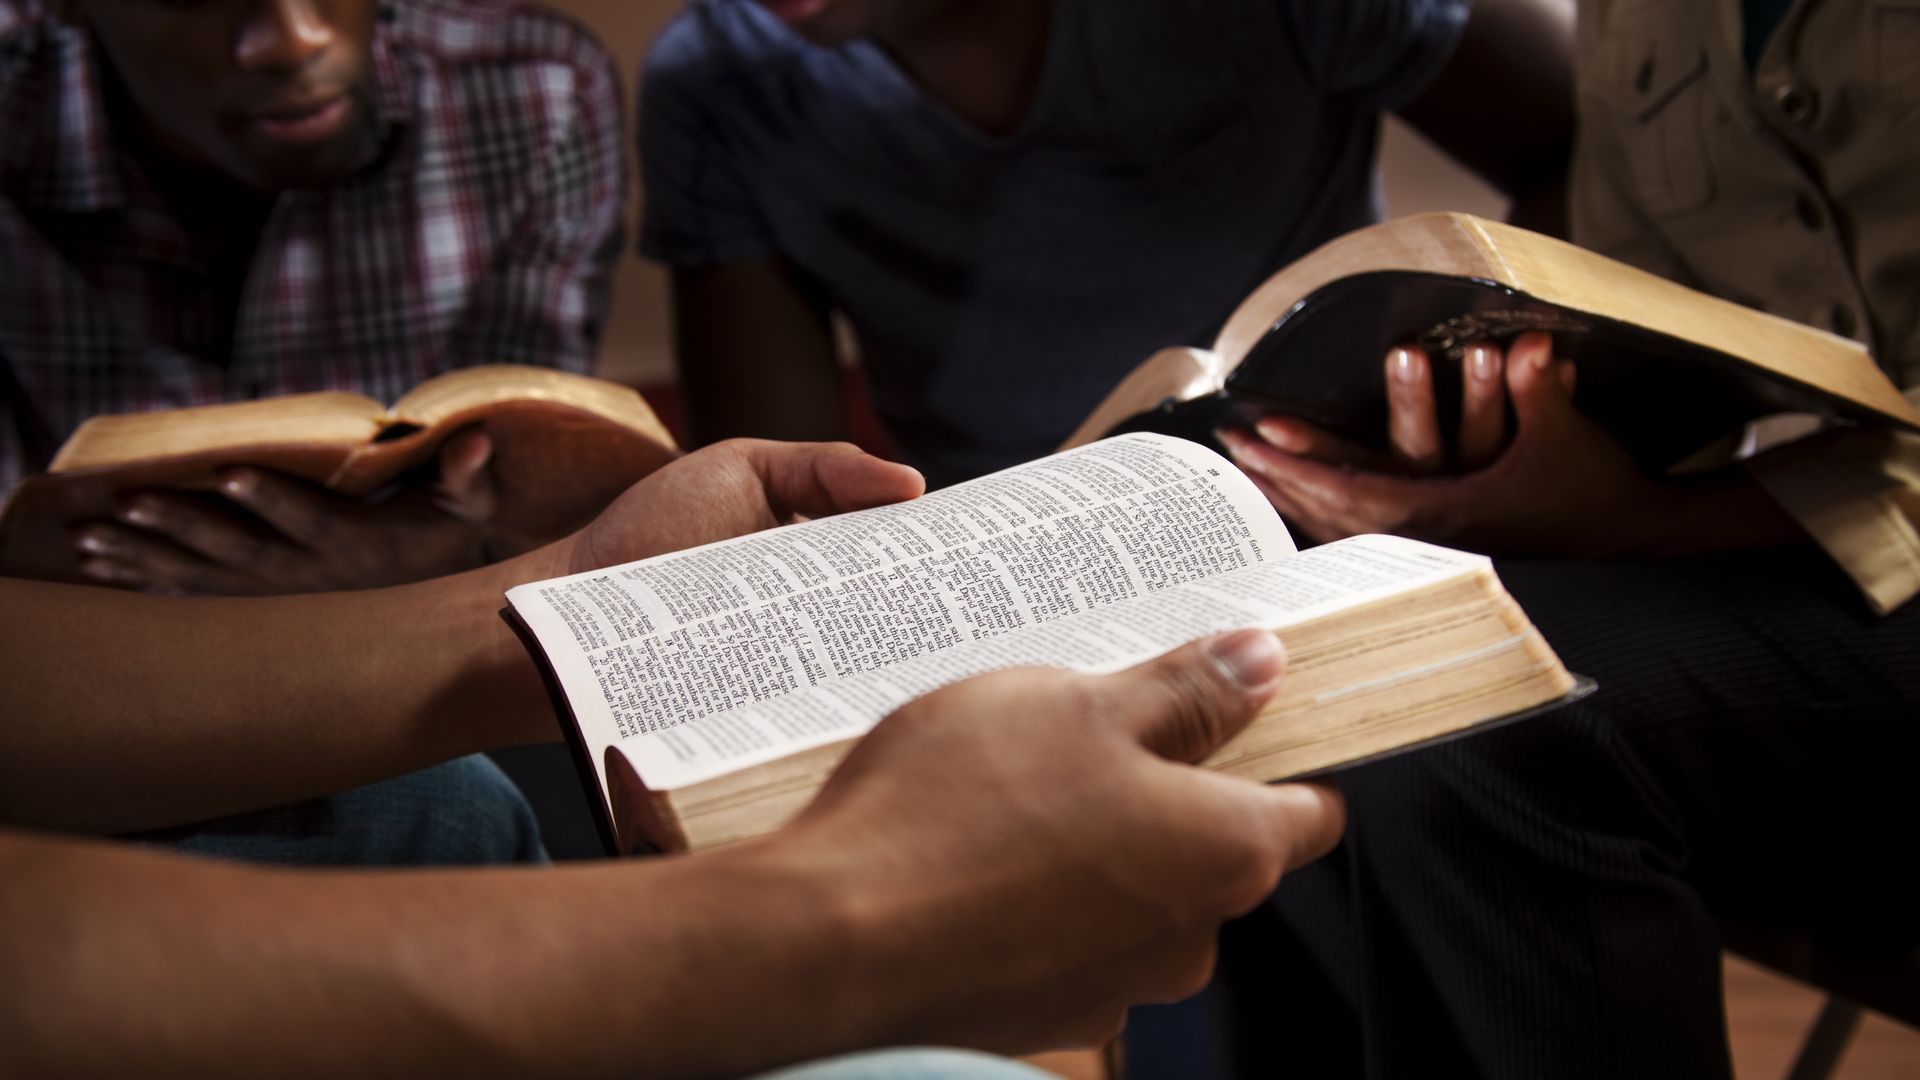 Group of people reading the Bible